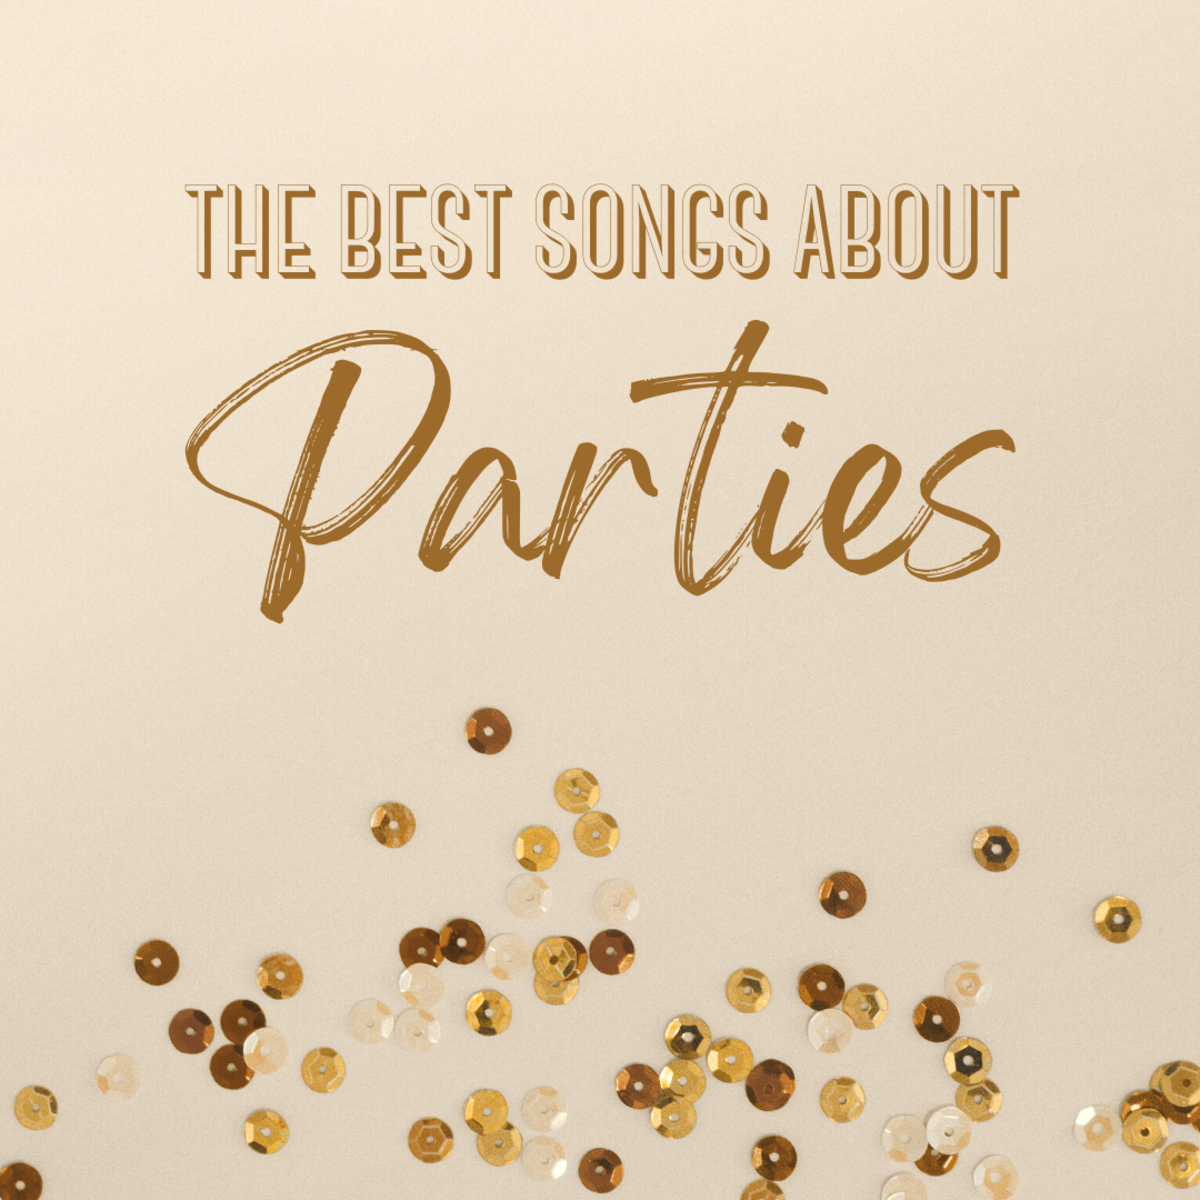 Searching for a good song about parties? Look no further!